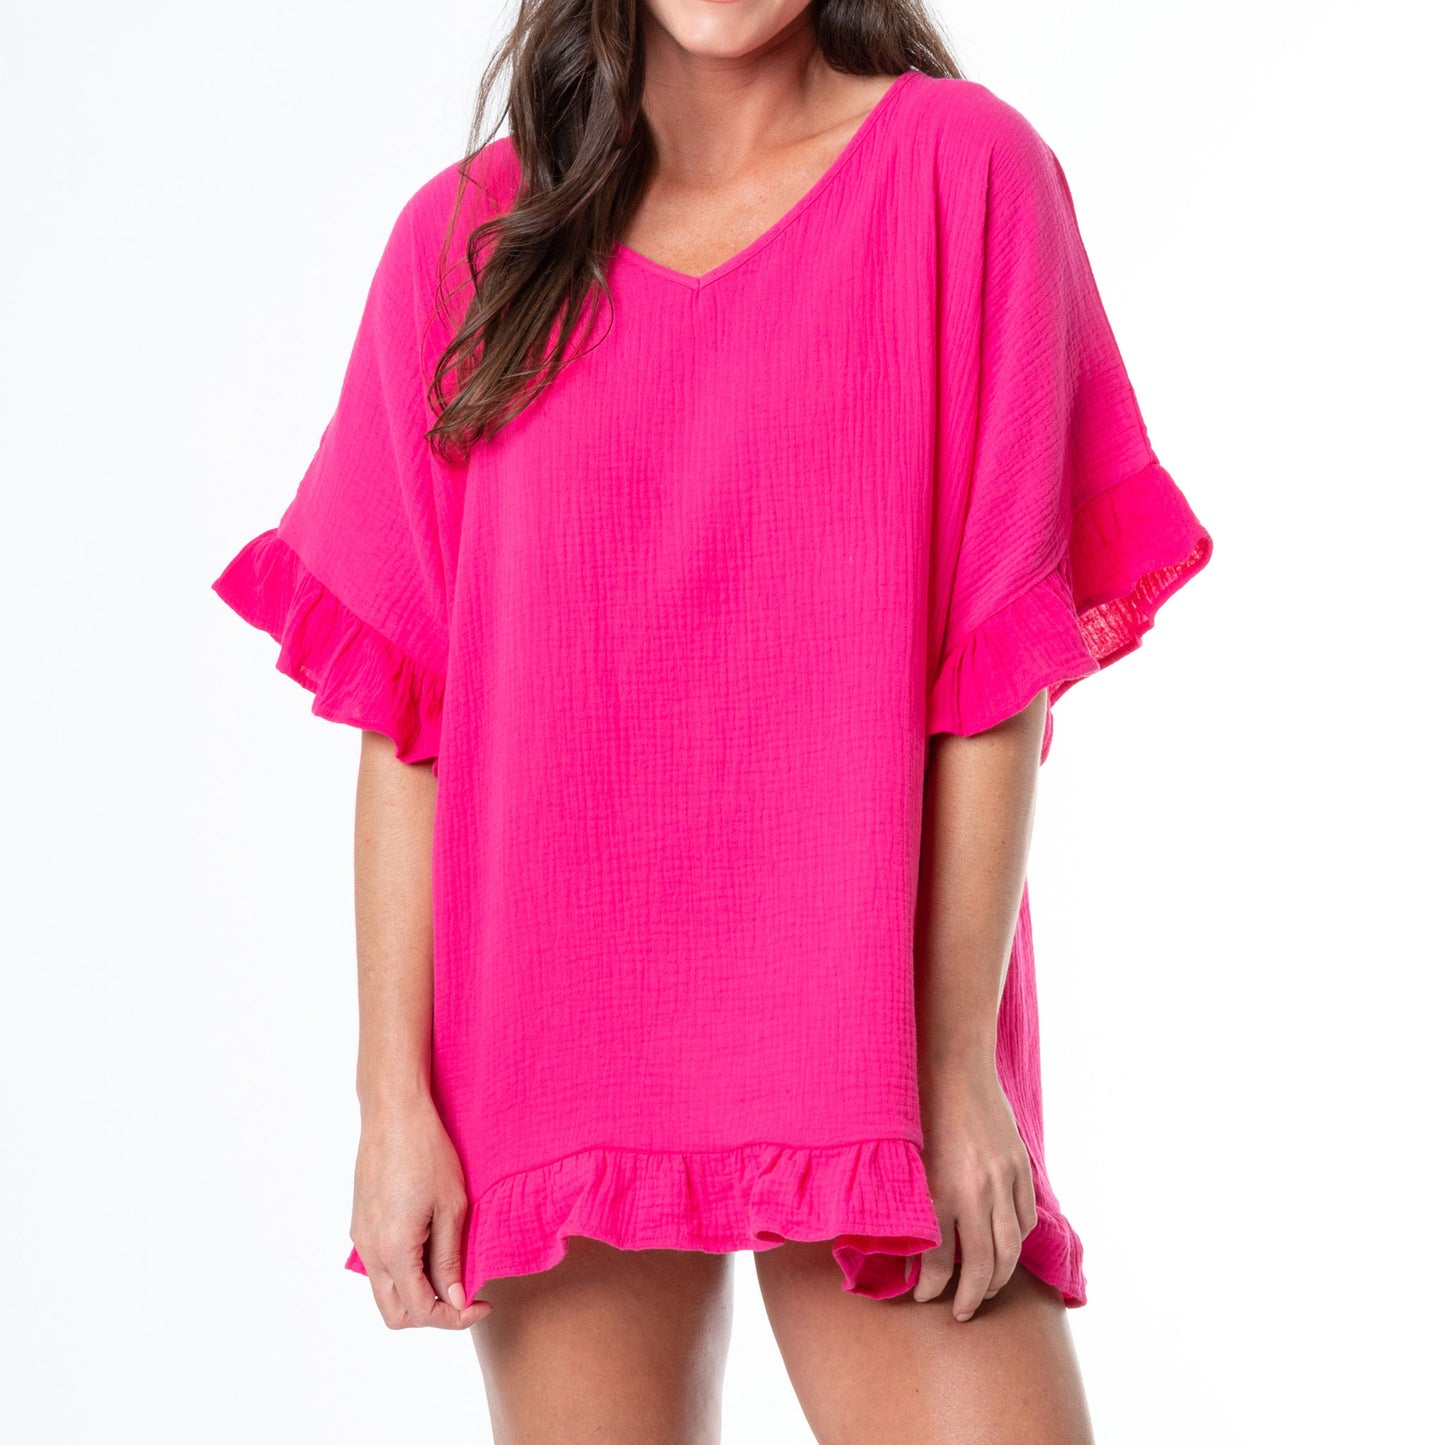 Demi One Size Ruffle Cotton Swimsuit Cover Up